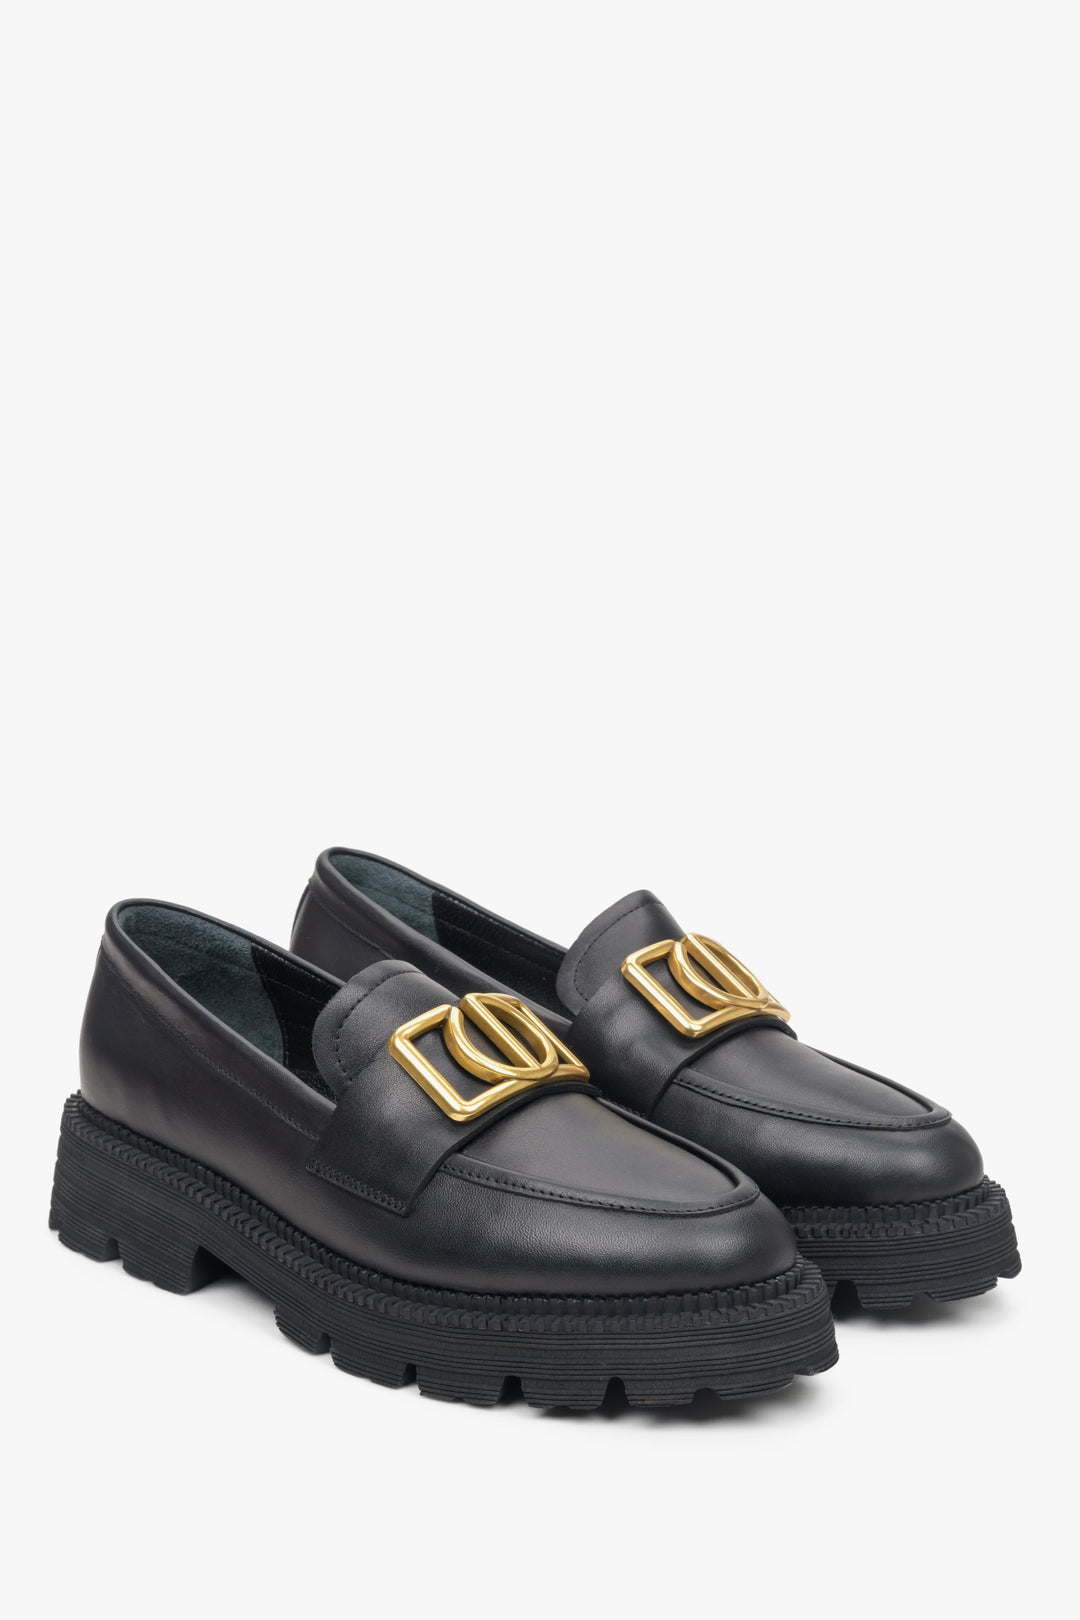 Women's black loafers on a chunky platform with gold chain.